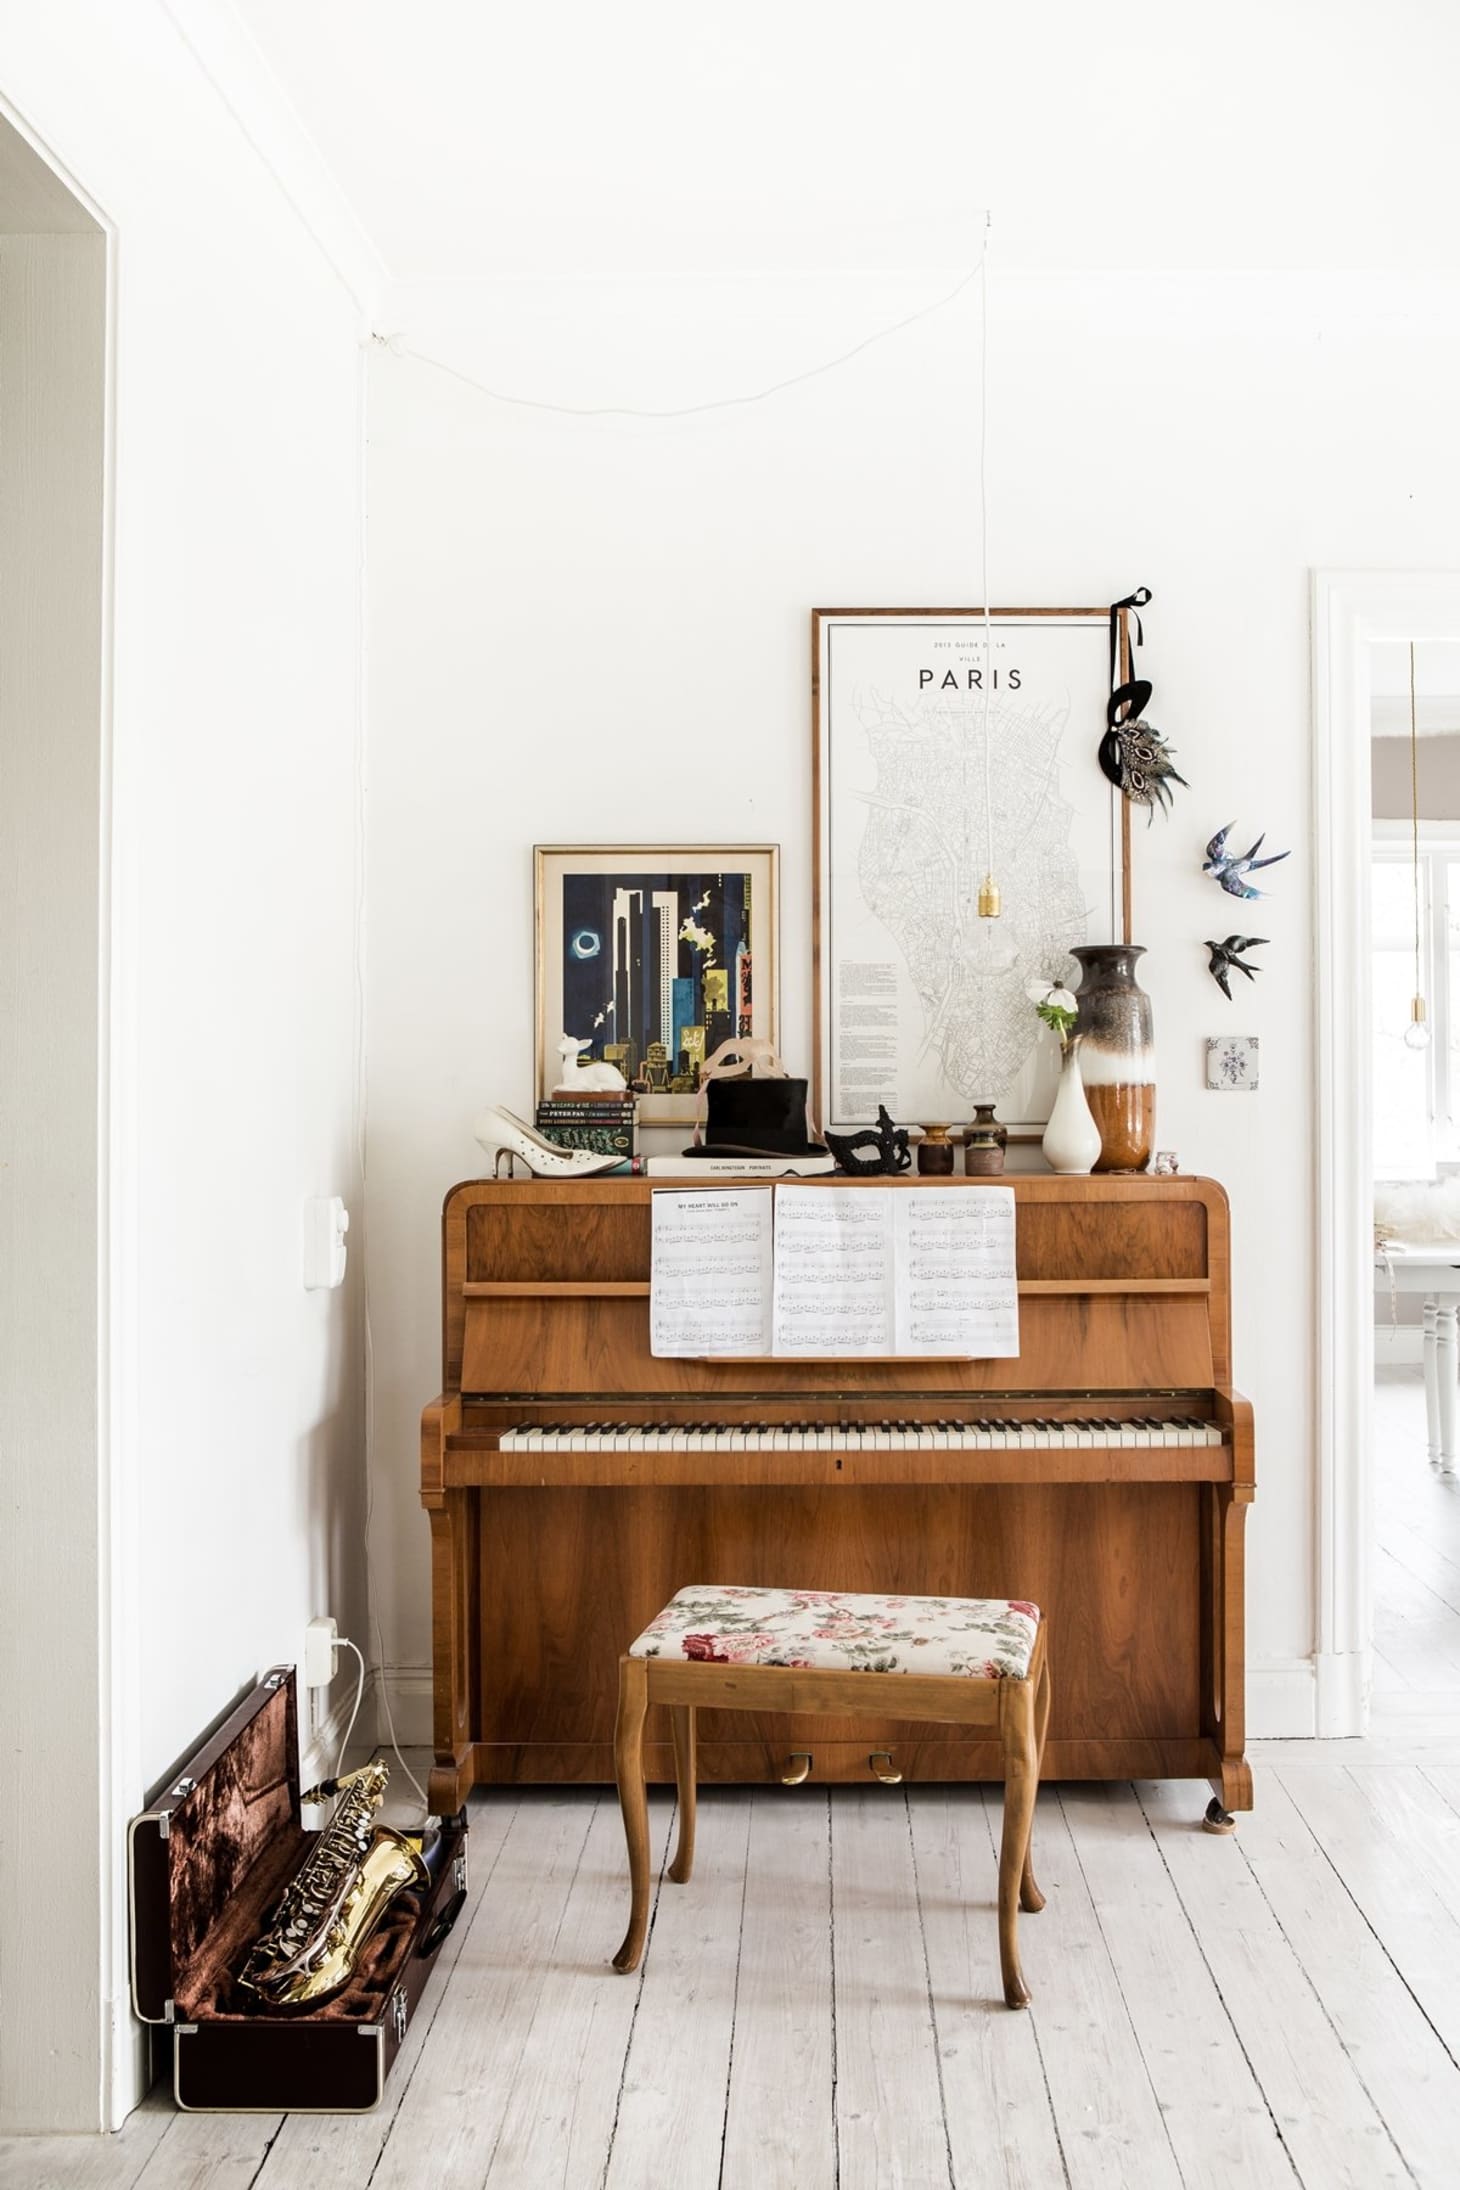 13 Ways to Decorate Around a Piano  Apartment Therapy